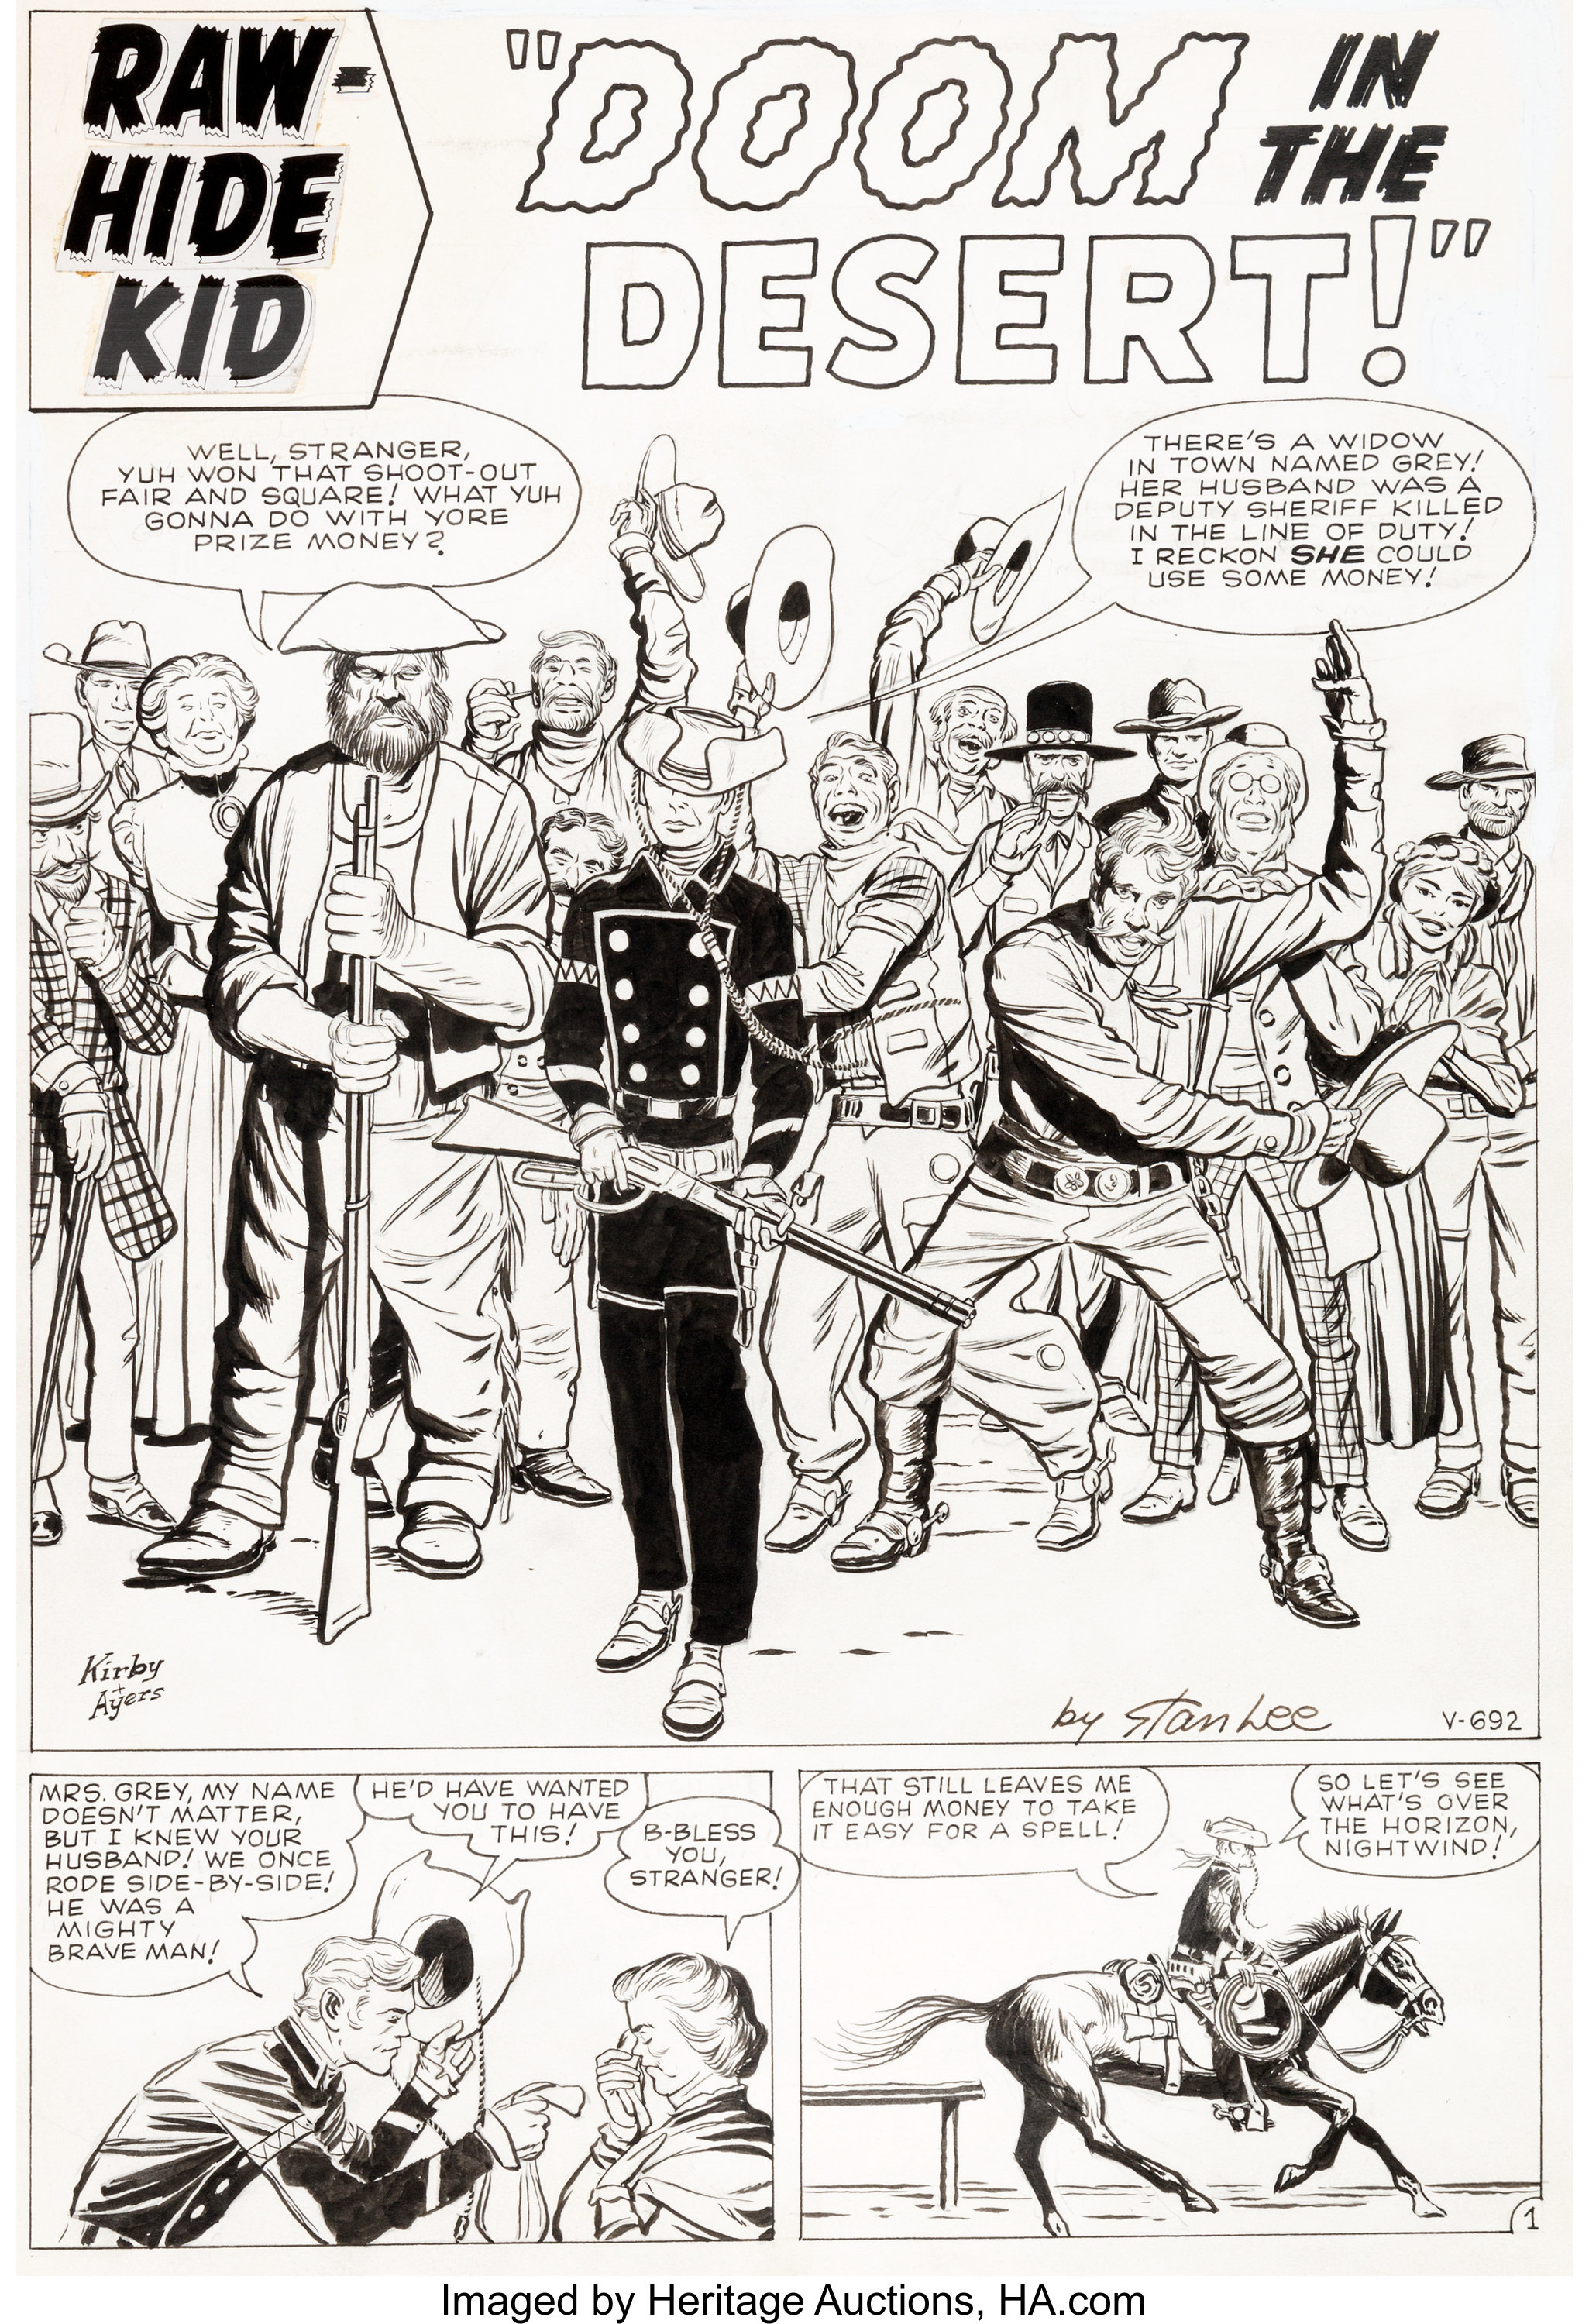 Jack Kirby and Dick Ayers Rawhide Kid #28 Story Page 1 Original Art | Lot  #94096 | Heritage Auctions